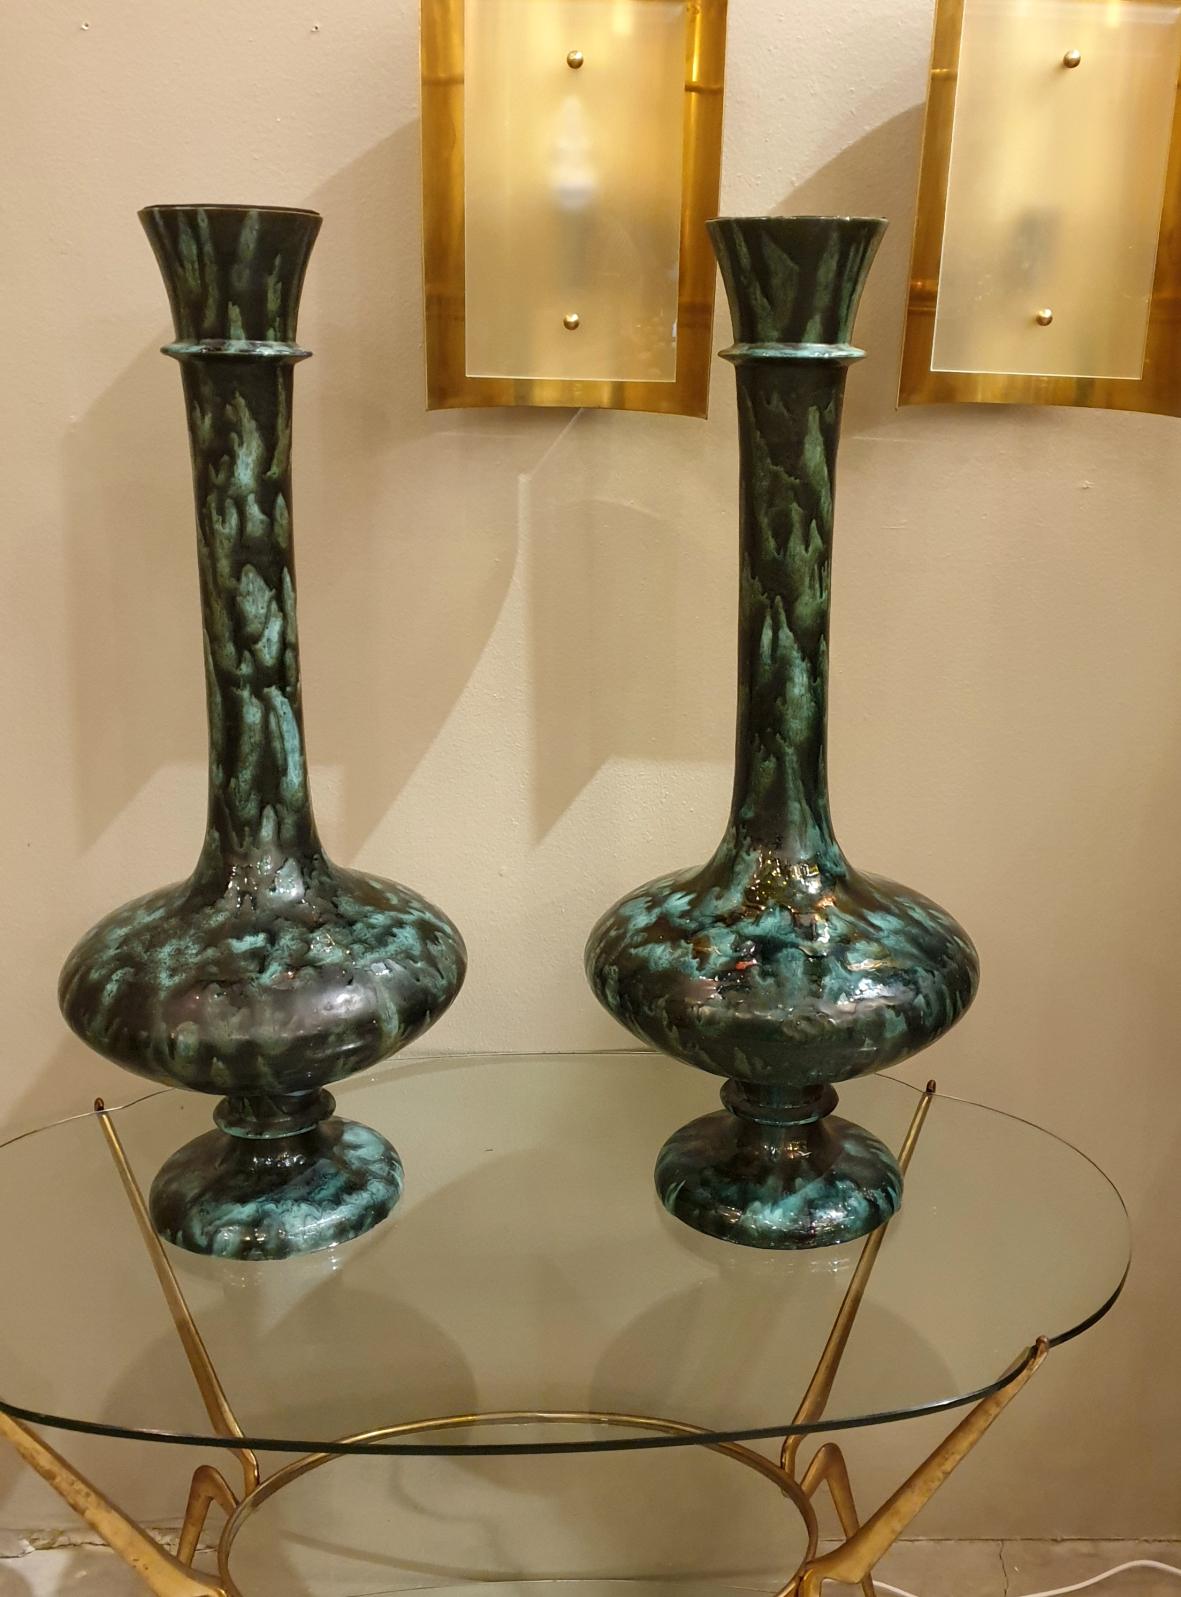 Pair of large and tall urns or Amphora vases, Mid-Century Modern, Italy, 1960s.
The pair of vintage Italian vases have dark green hues and black colors, with a metal part inside the top of each vase.
Beautiful elegant Amphora shape for these